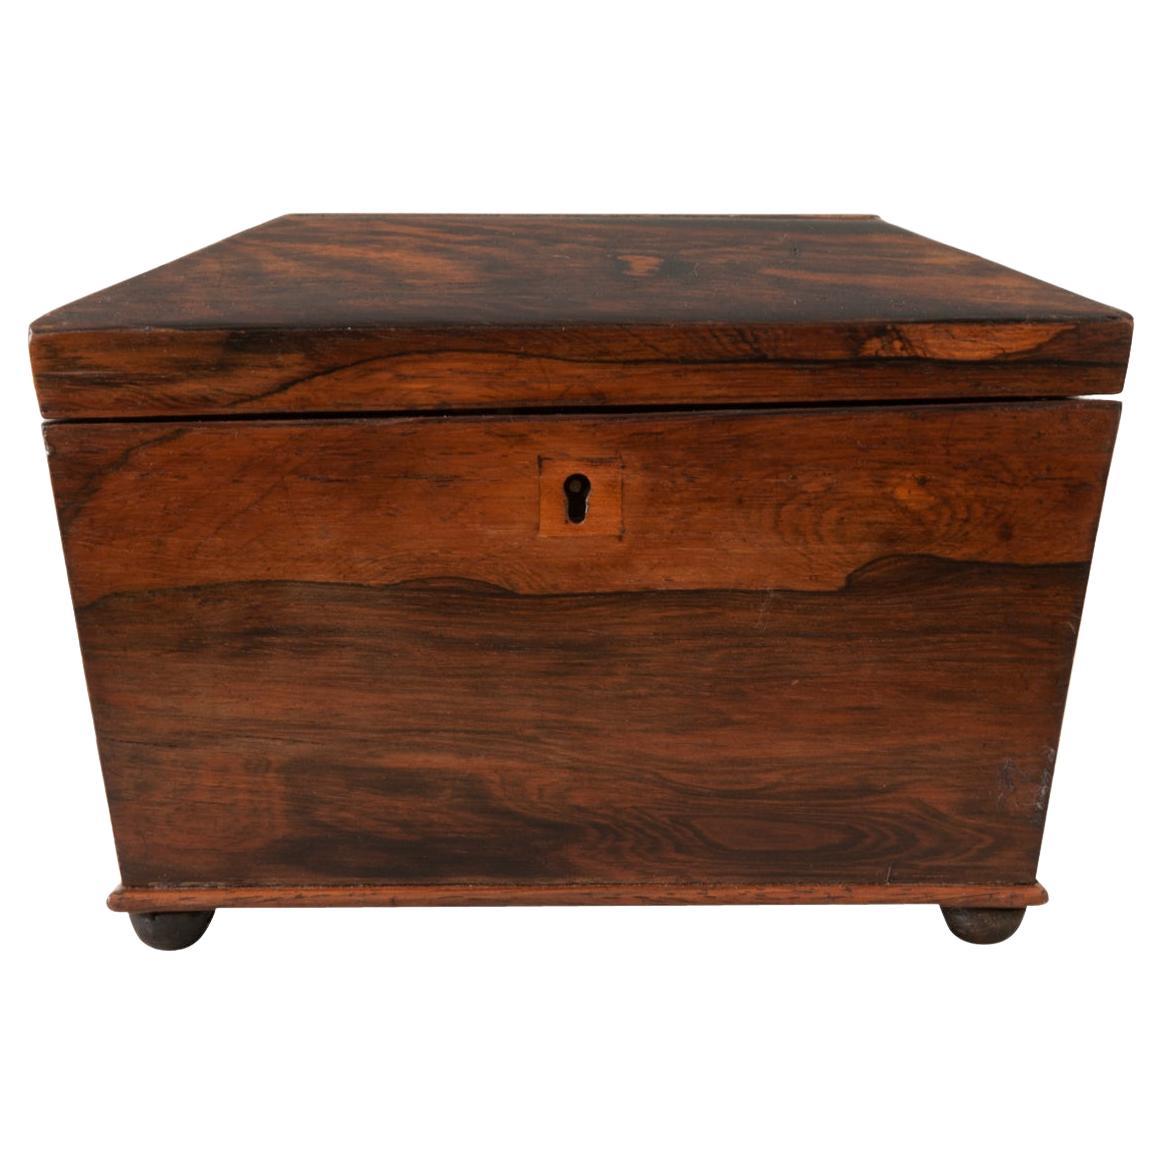 English 19th Century Rosewood Tea Caddy For Sale